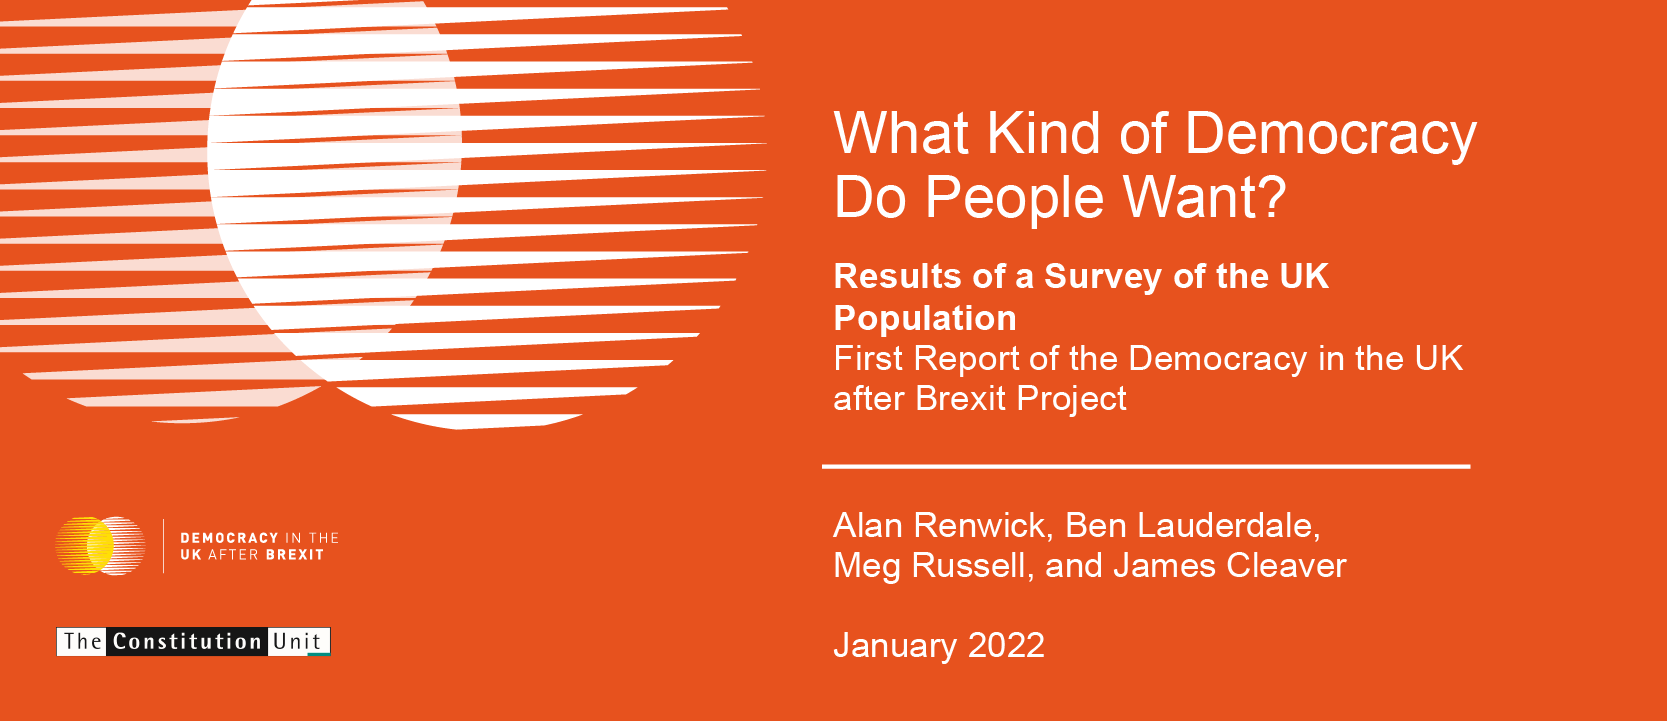 A cropped and rearranged version of the front cover of the report